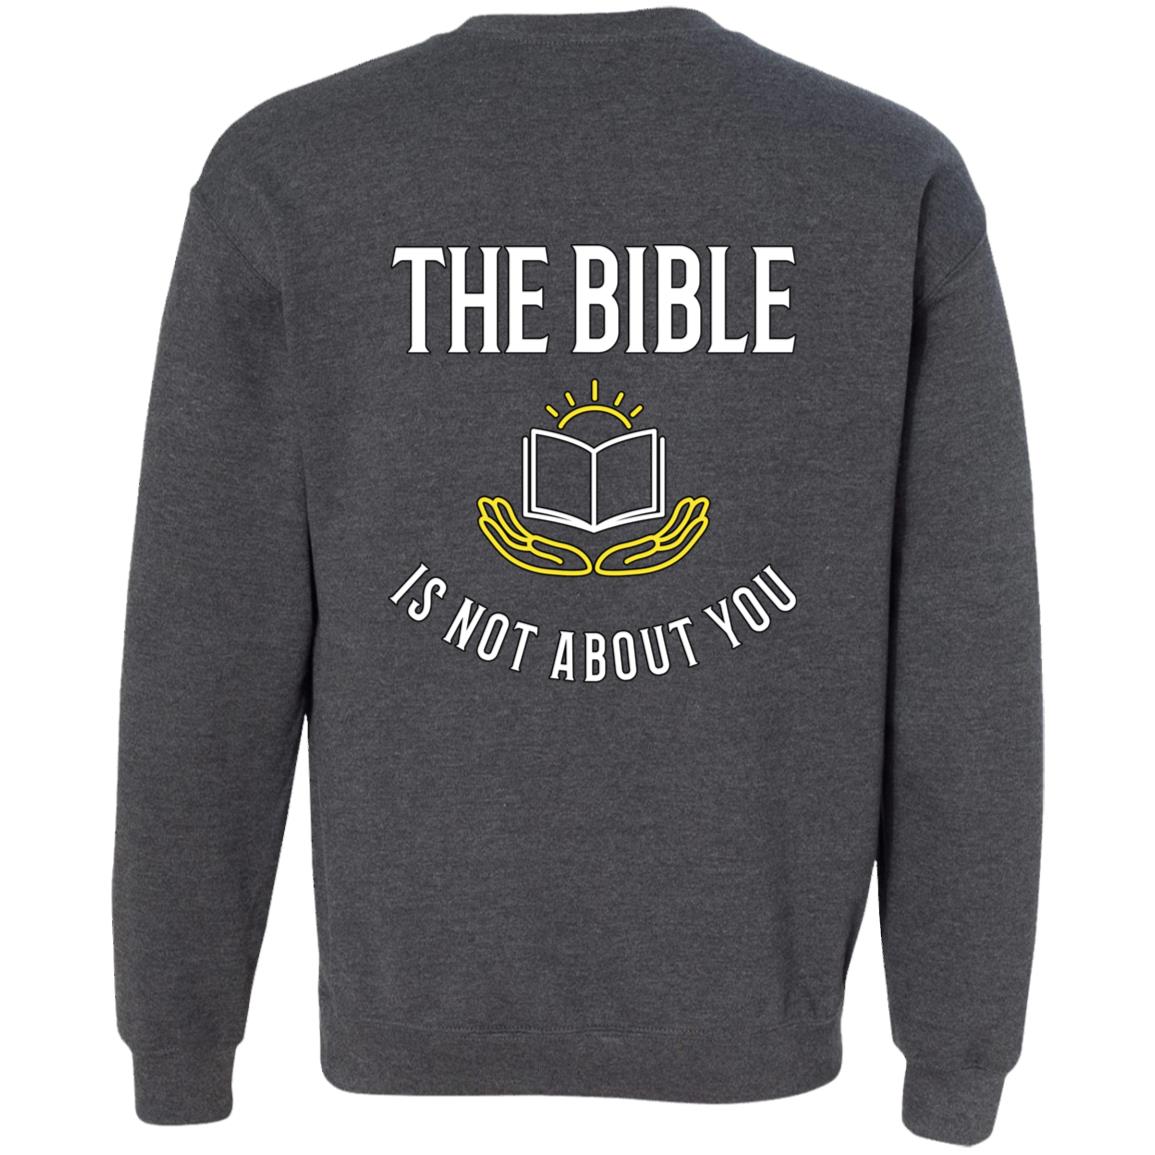 The Bible is Not About You (Unisex Sweatshirt)